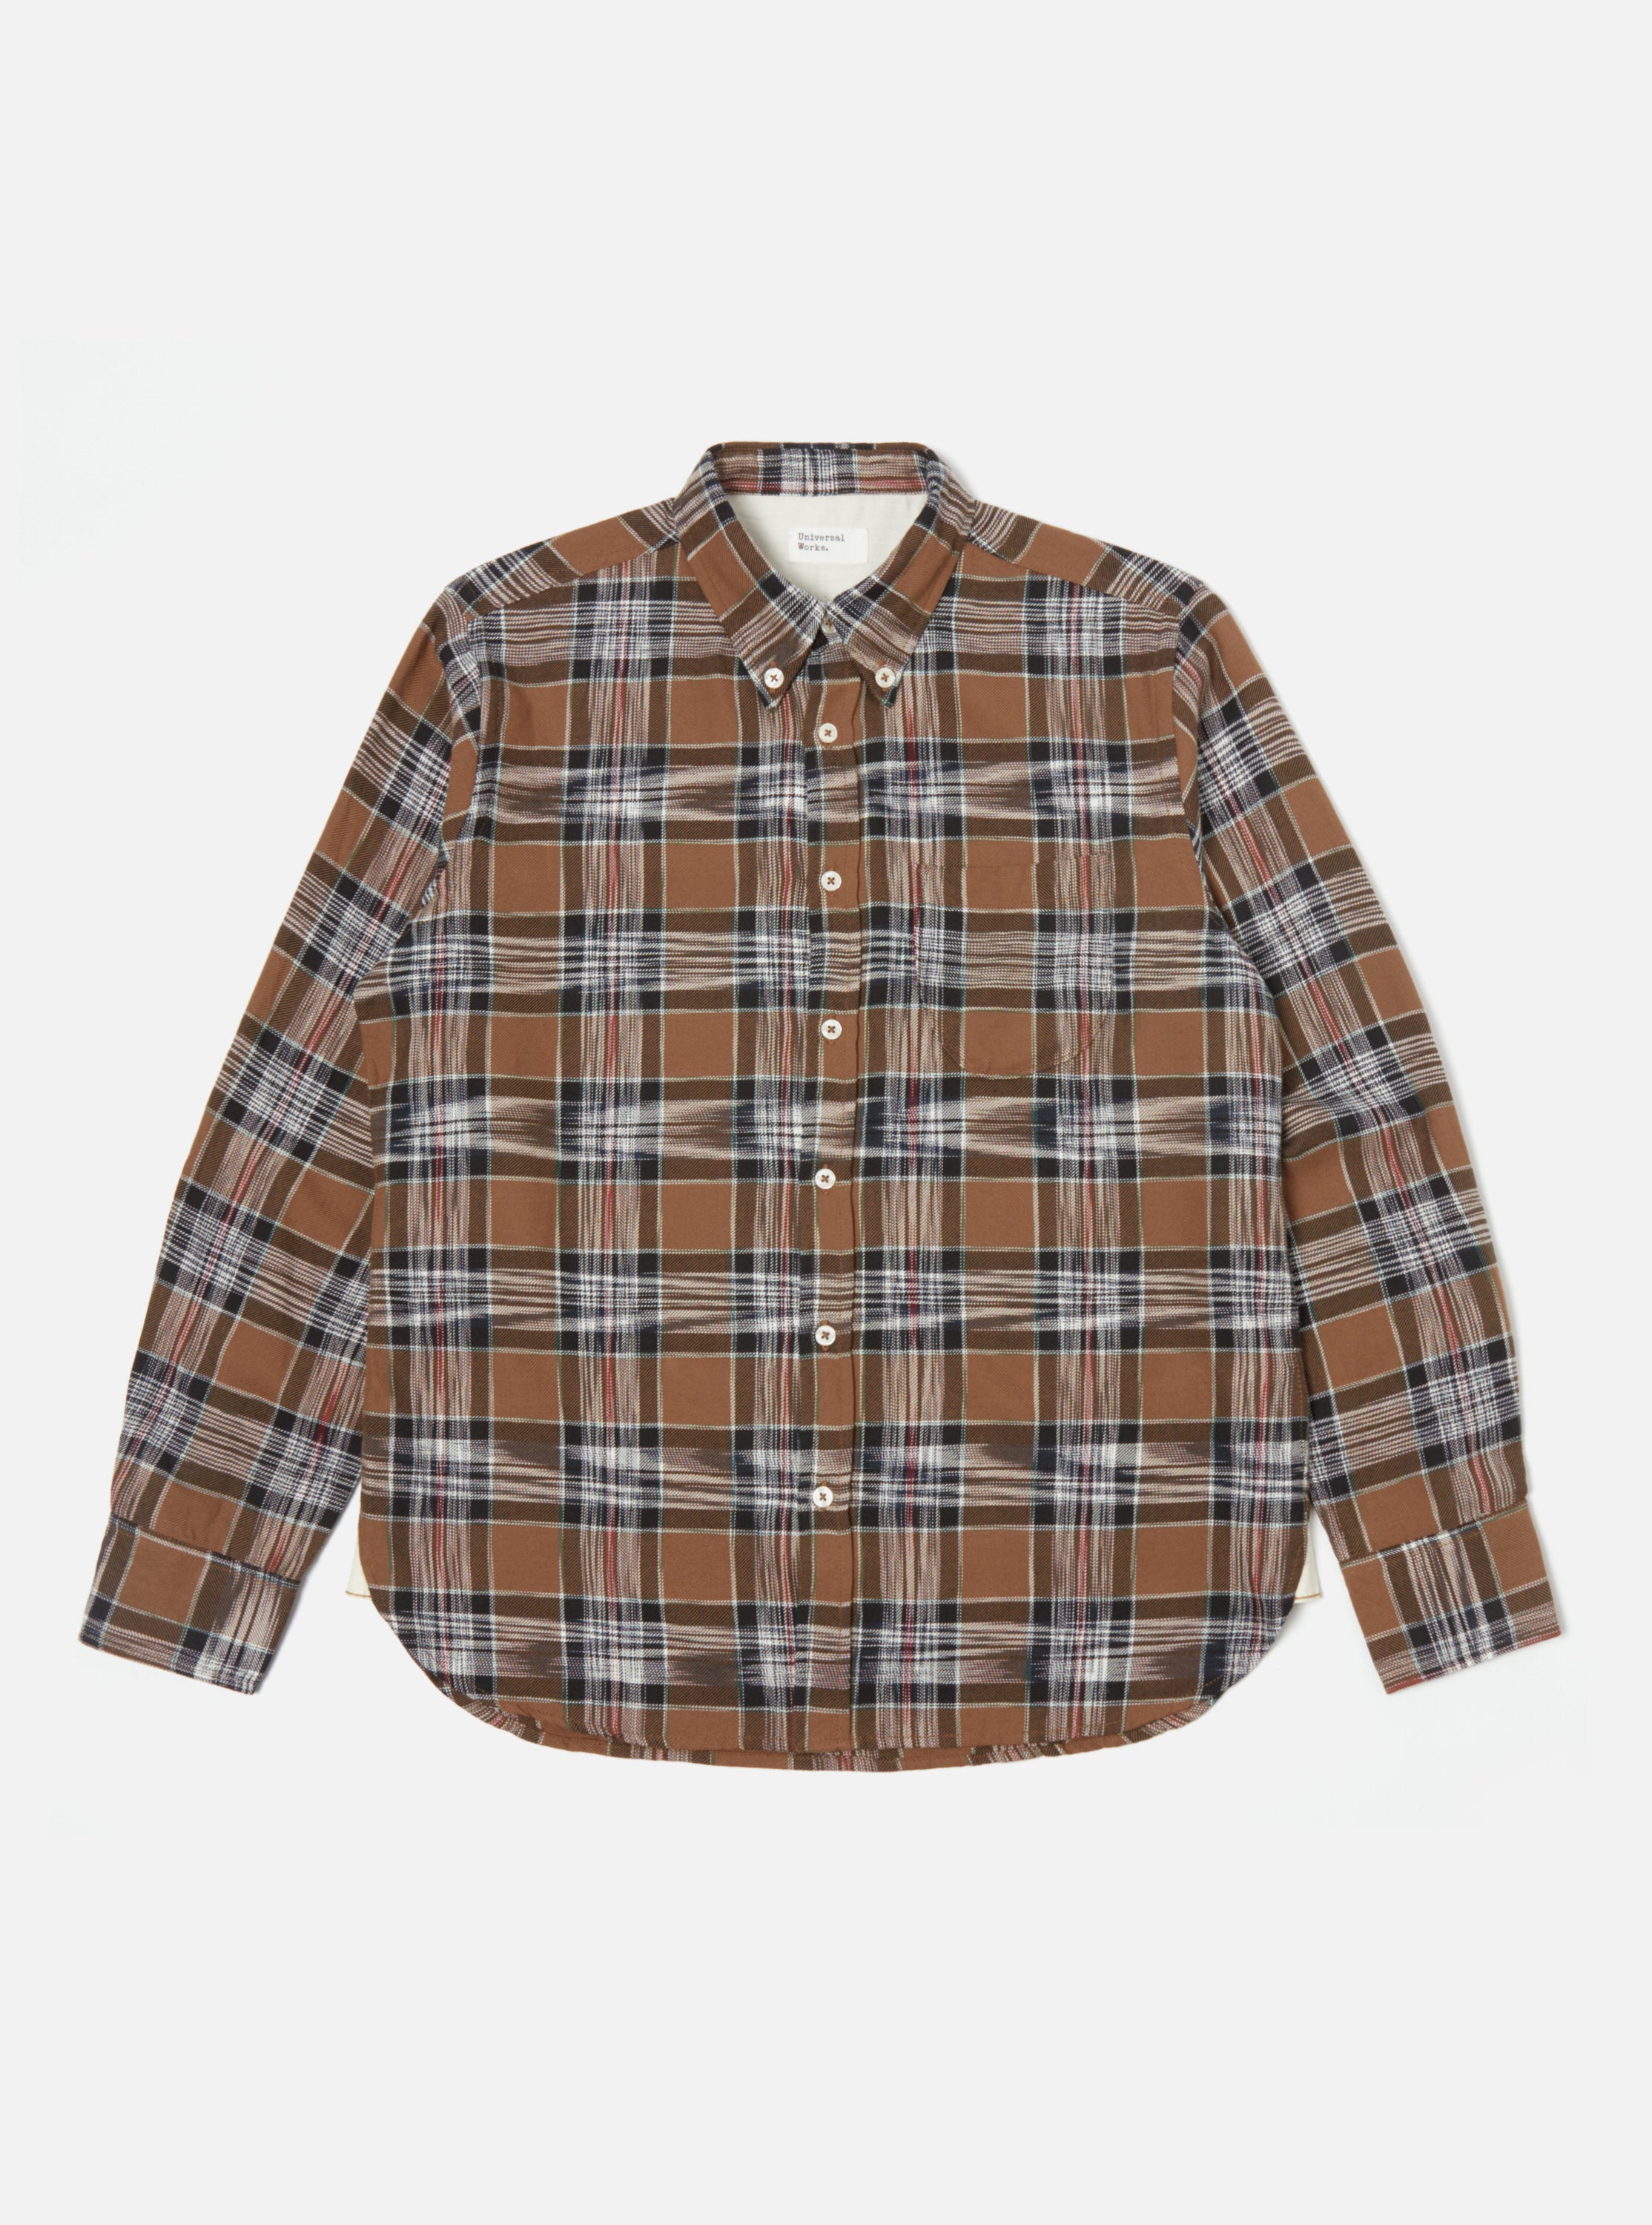 Universal Works Daybrook Shirt in Brown Ikat Twill Check